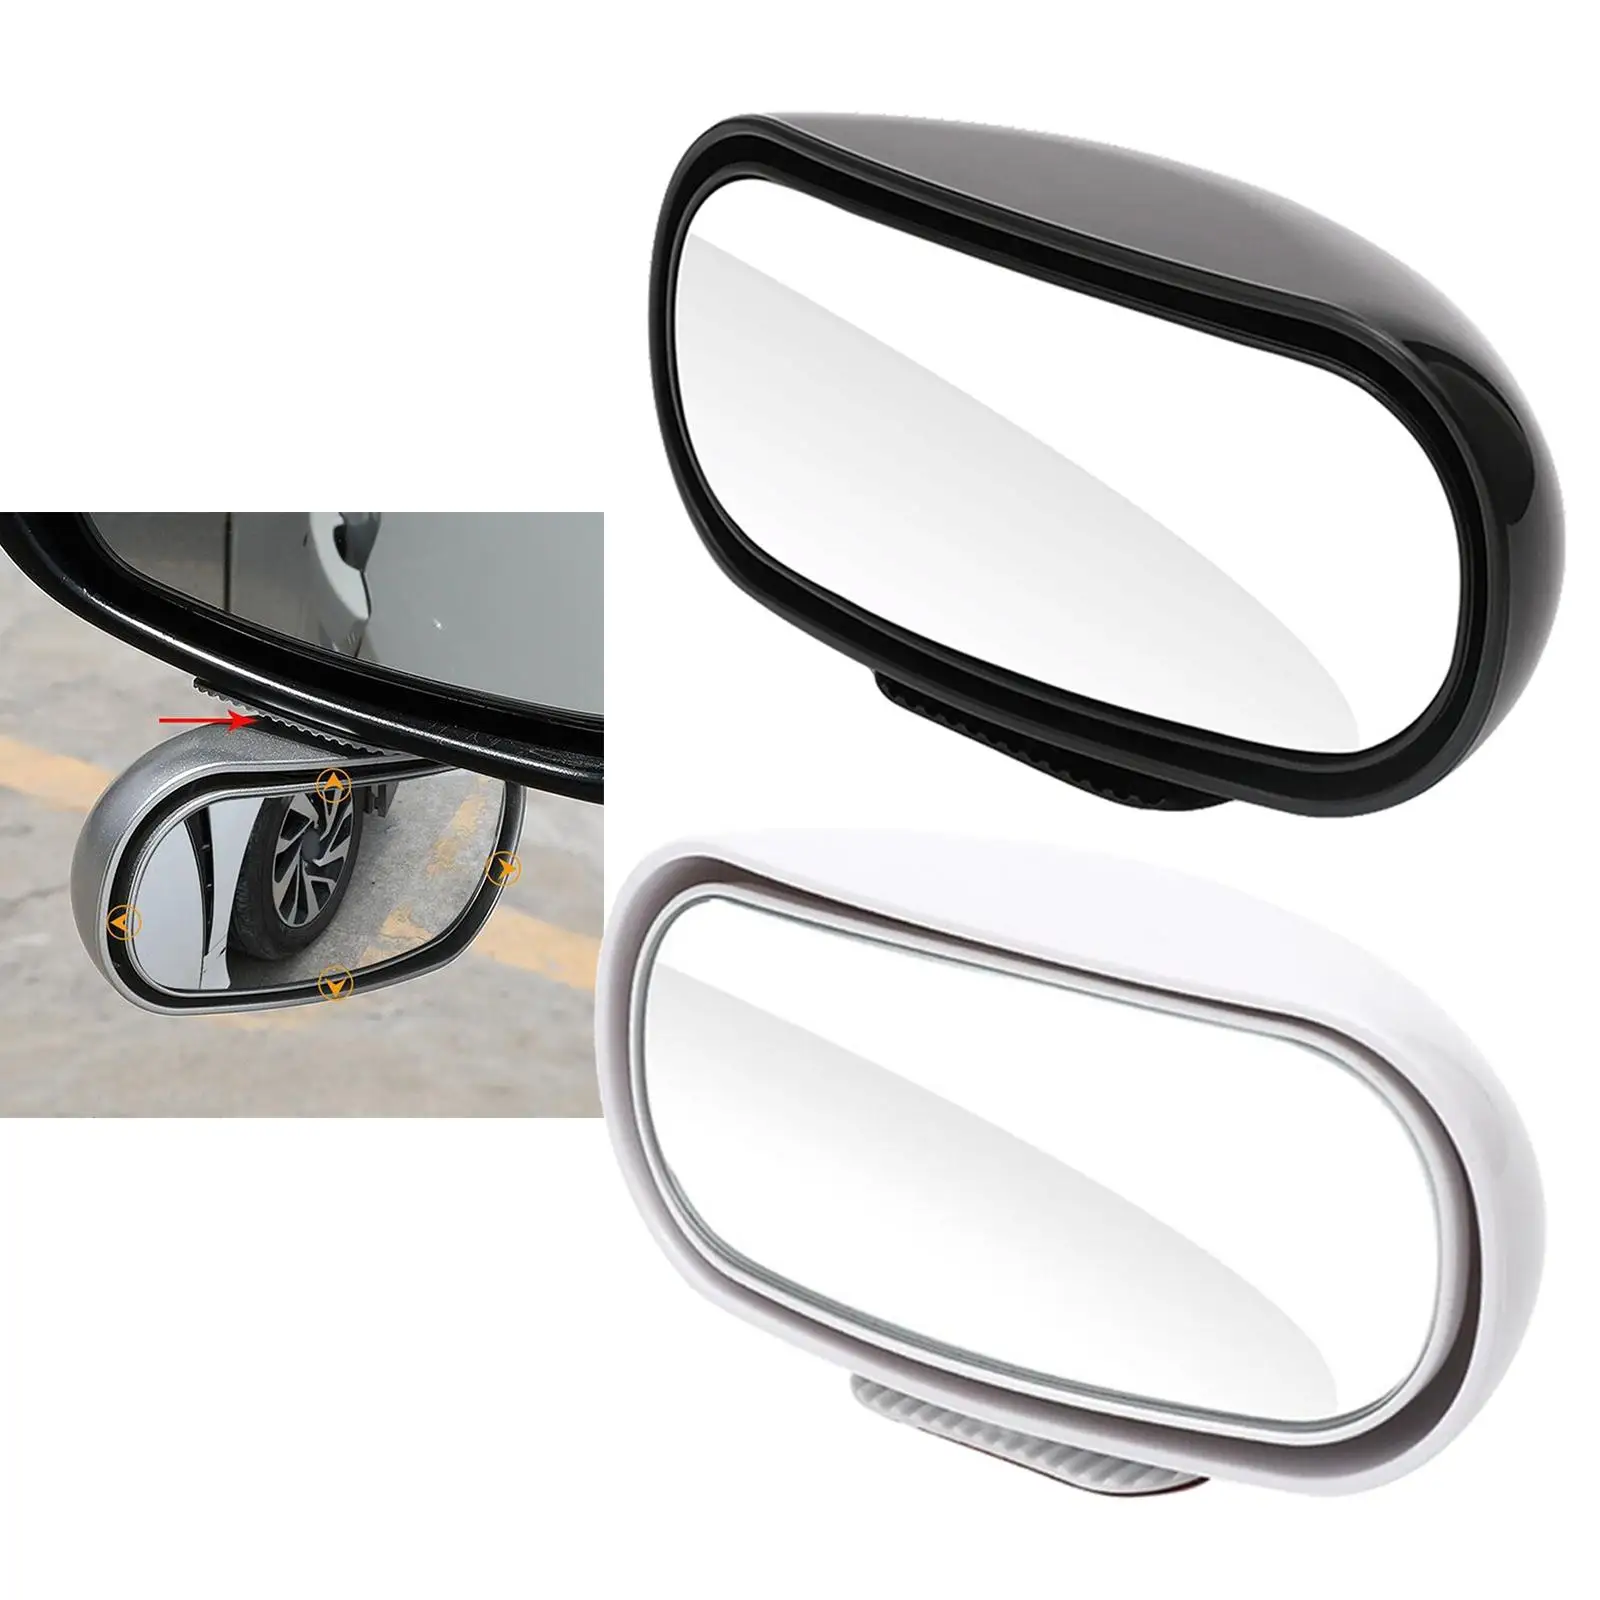 Car Blind Spot Mirror 360Rotatable Universal Rear View Assist Waterproof HD Car Mirror Accessories Fit for Universal Vehicle